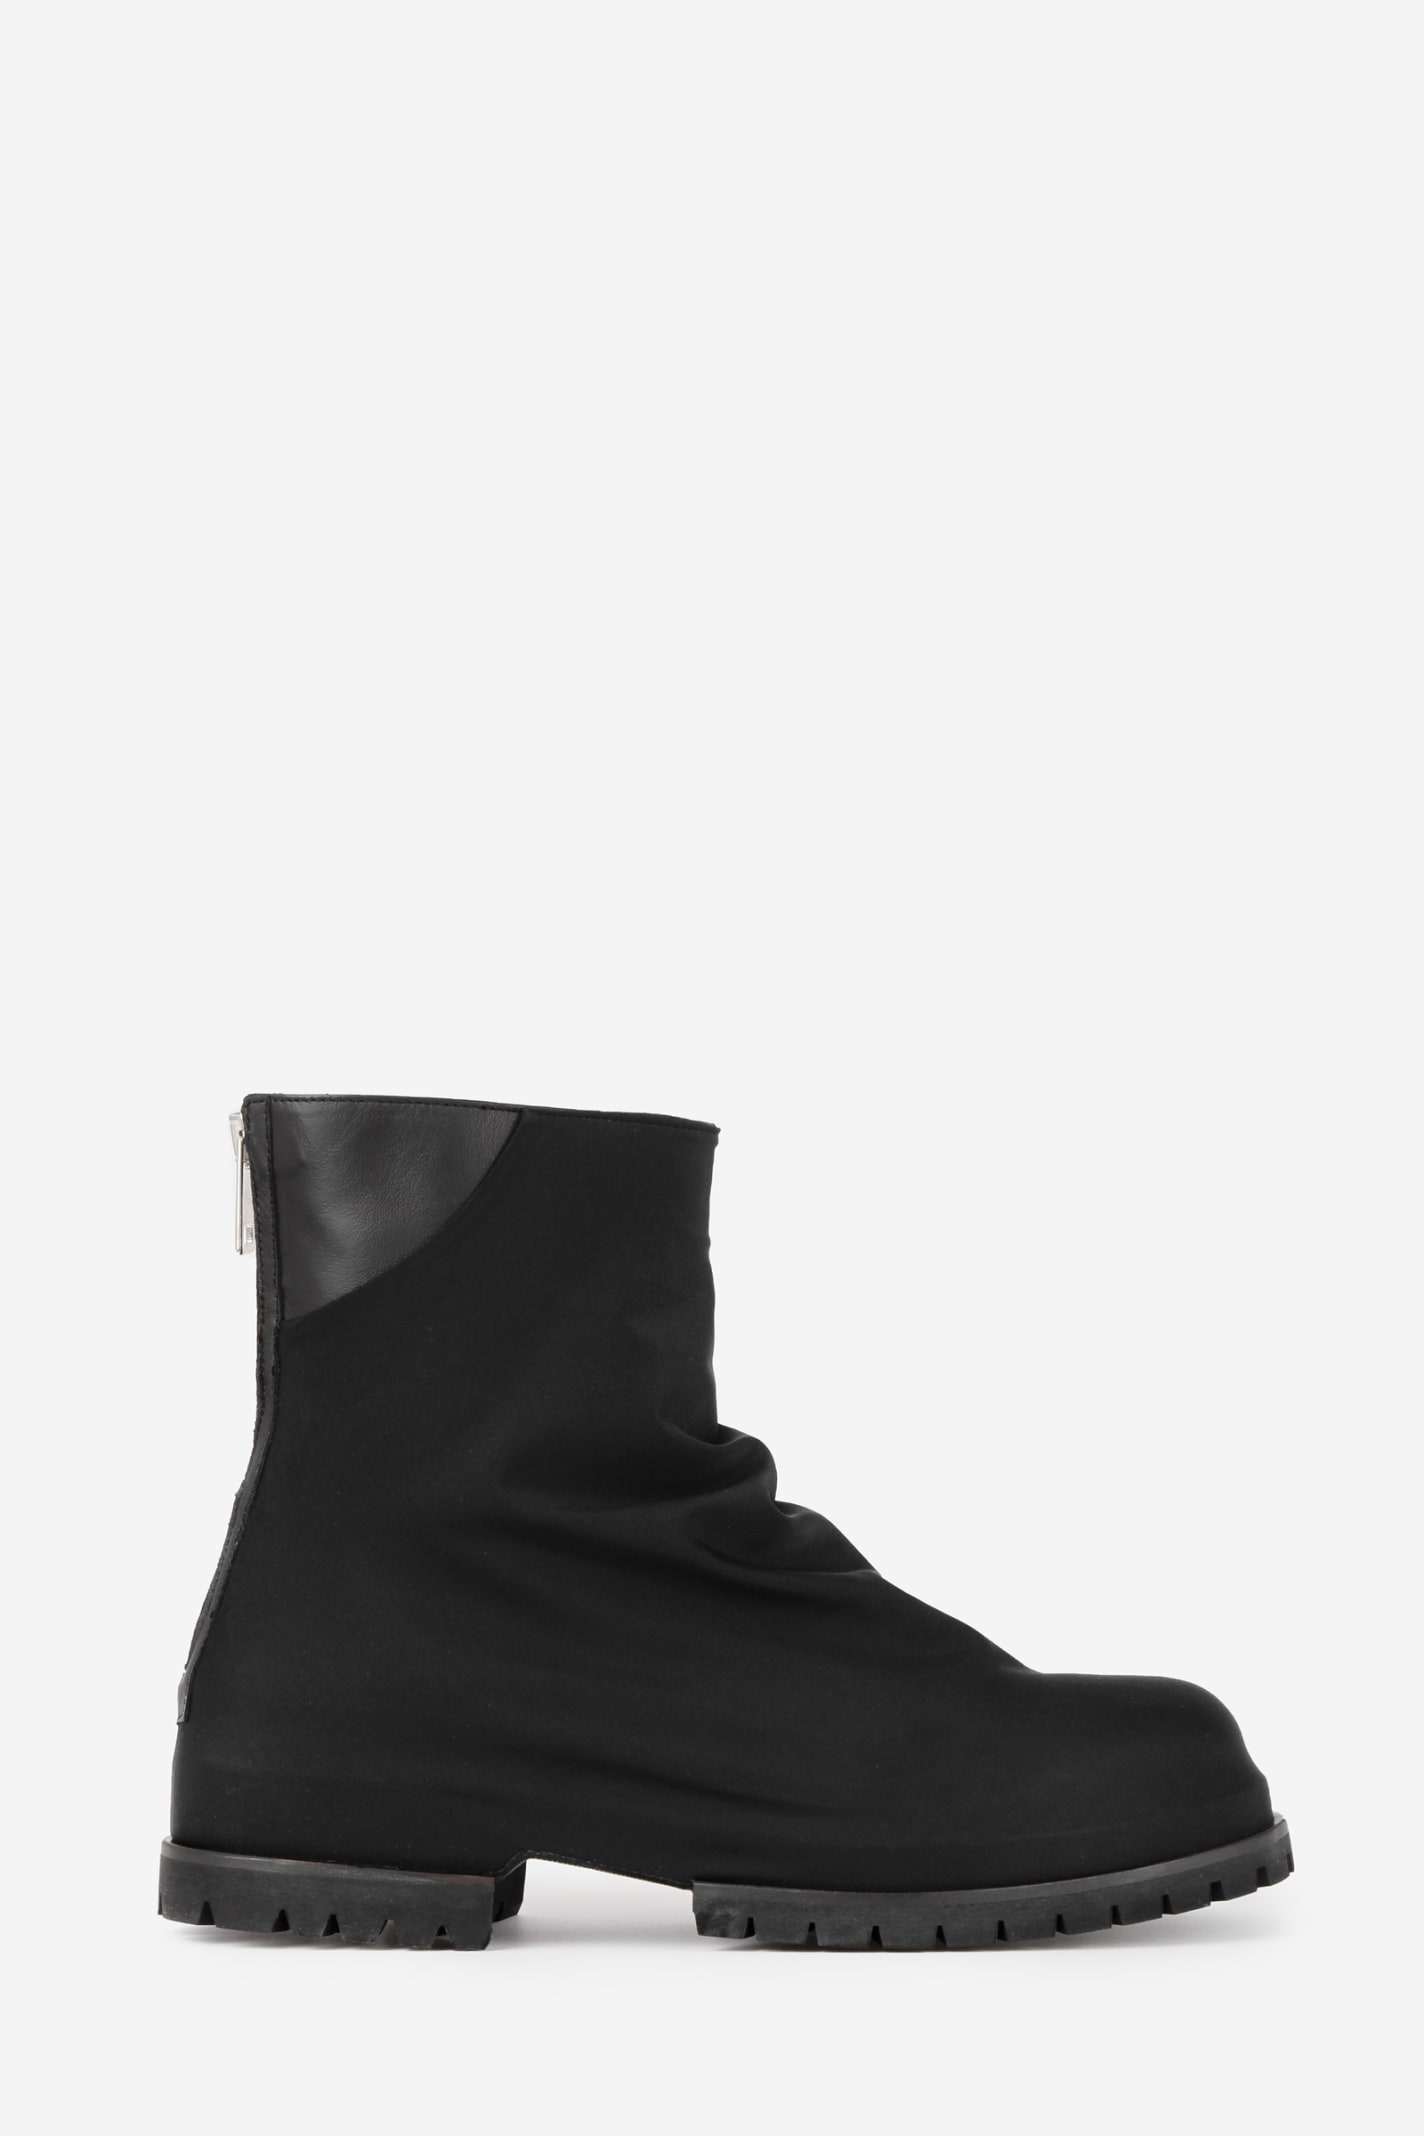 FourTwoFour on Fairfax Low Boot Boots